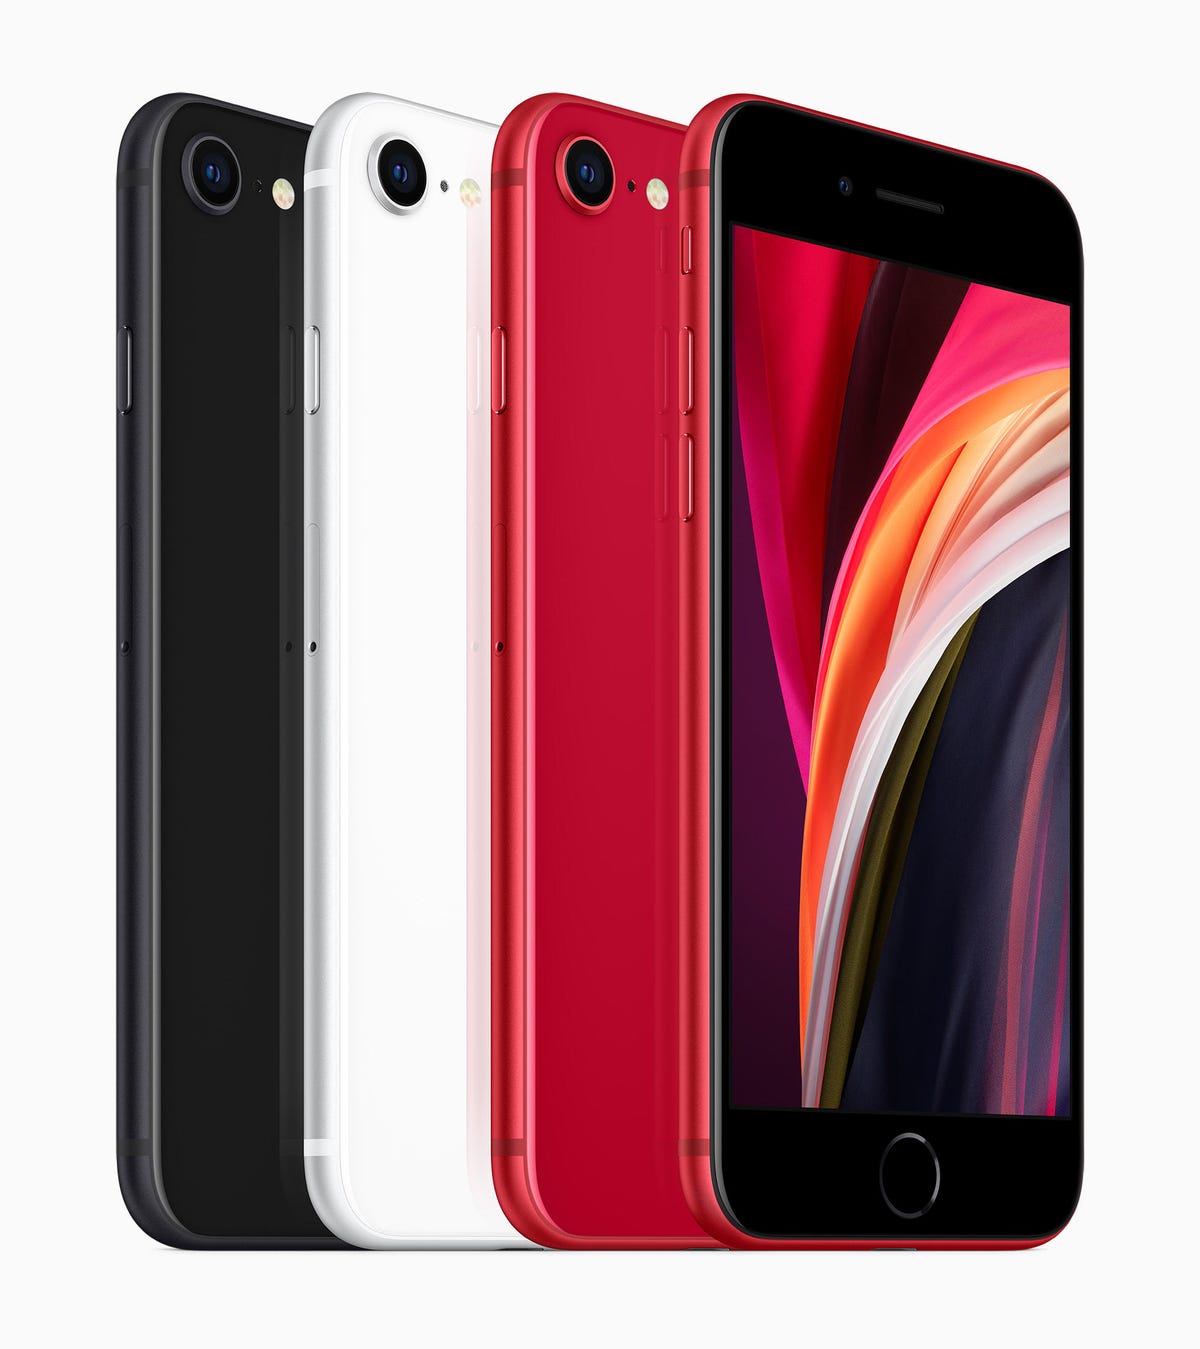 apple-new-iphone-se-black-white-product-red-colors-04152020.jpg